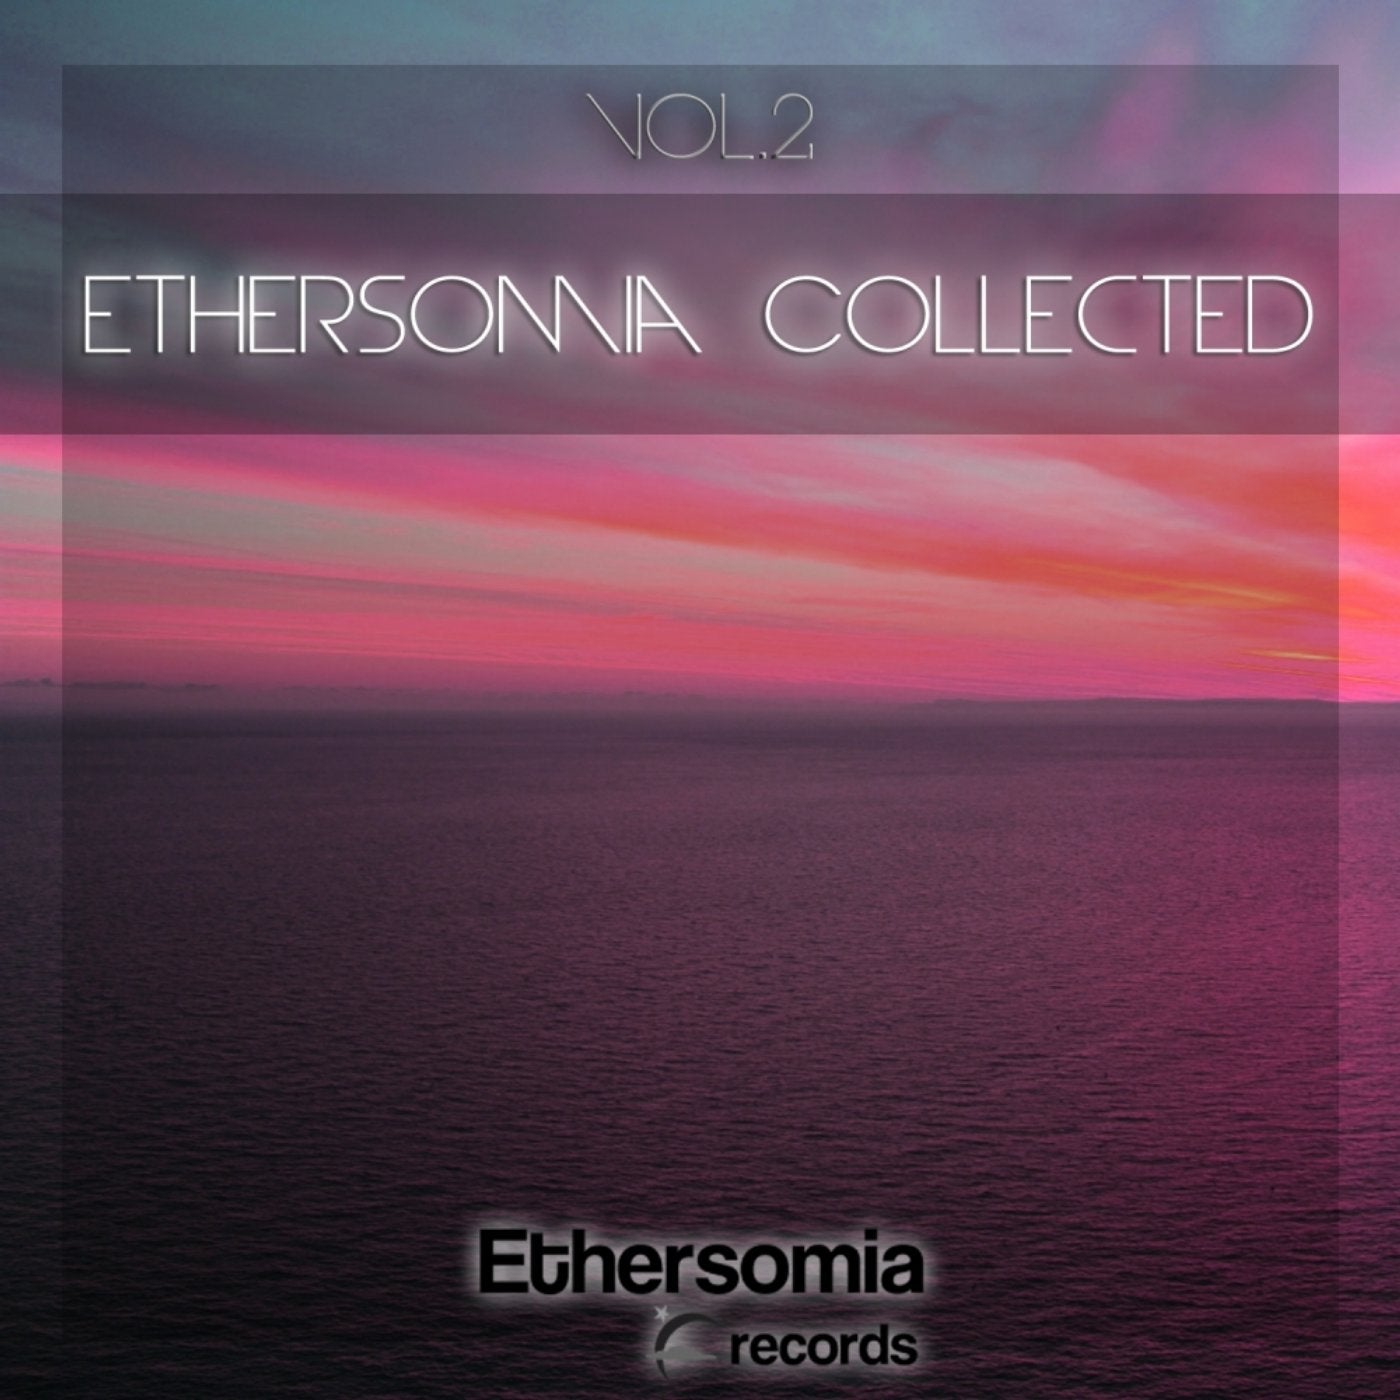 Ethersomia Collected, Vol. 2